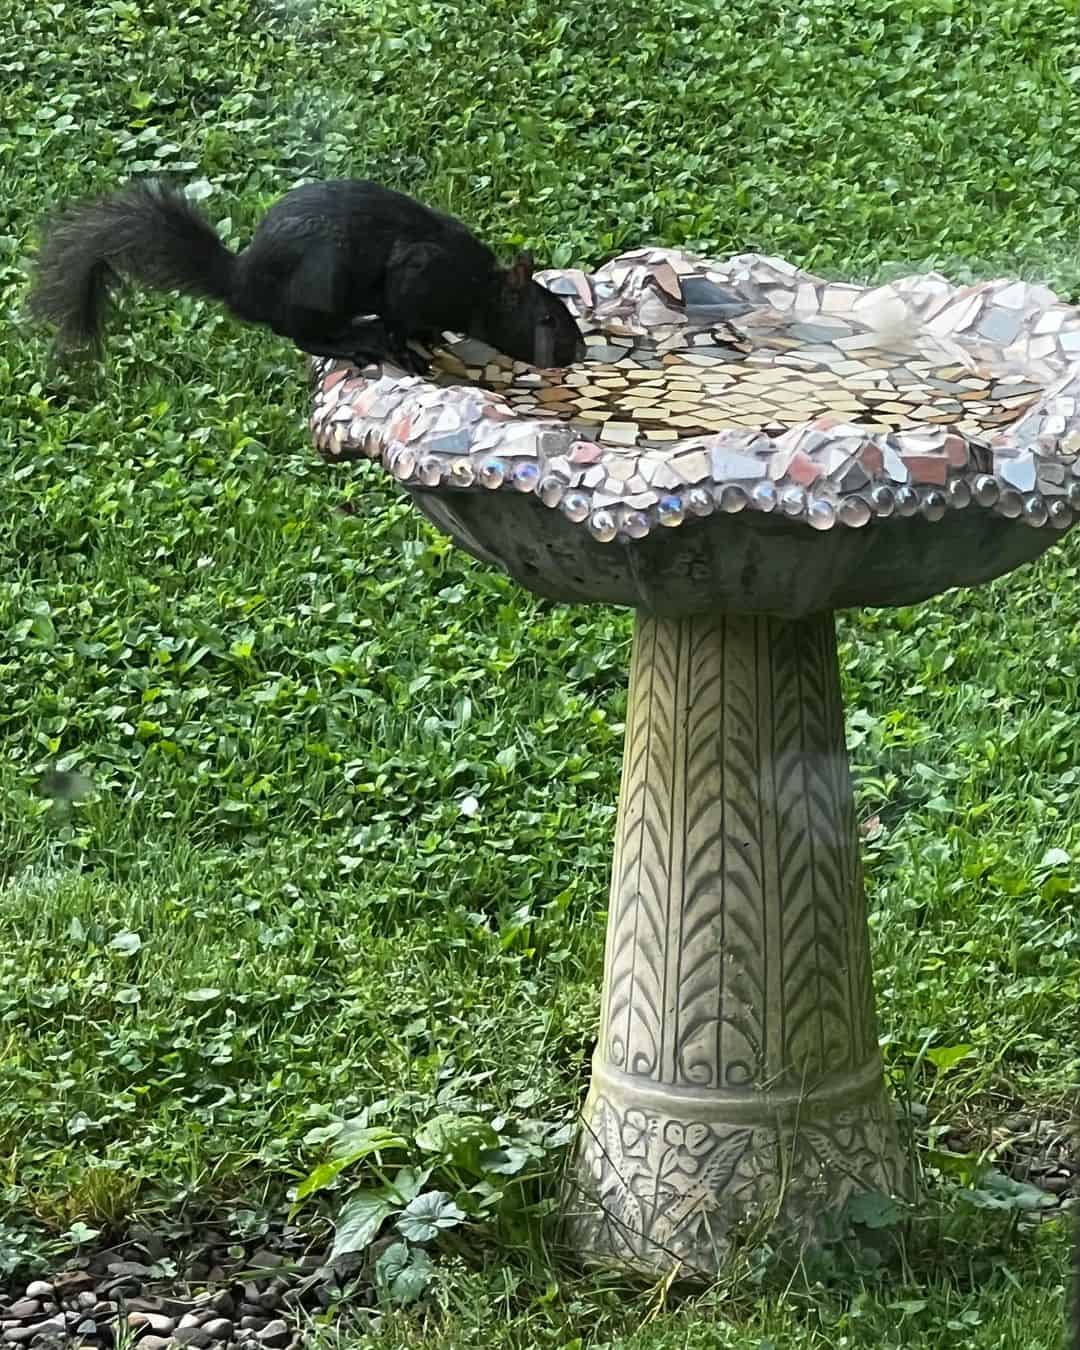 Help! Why is there a Black Squirrel in my Garden?